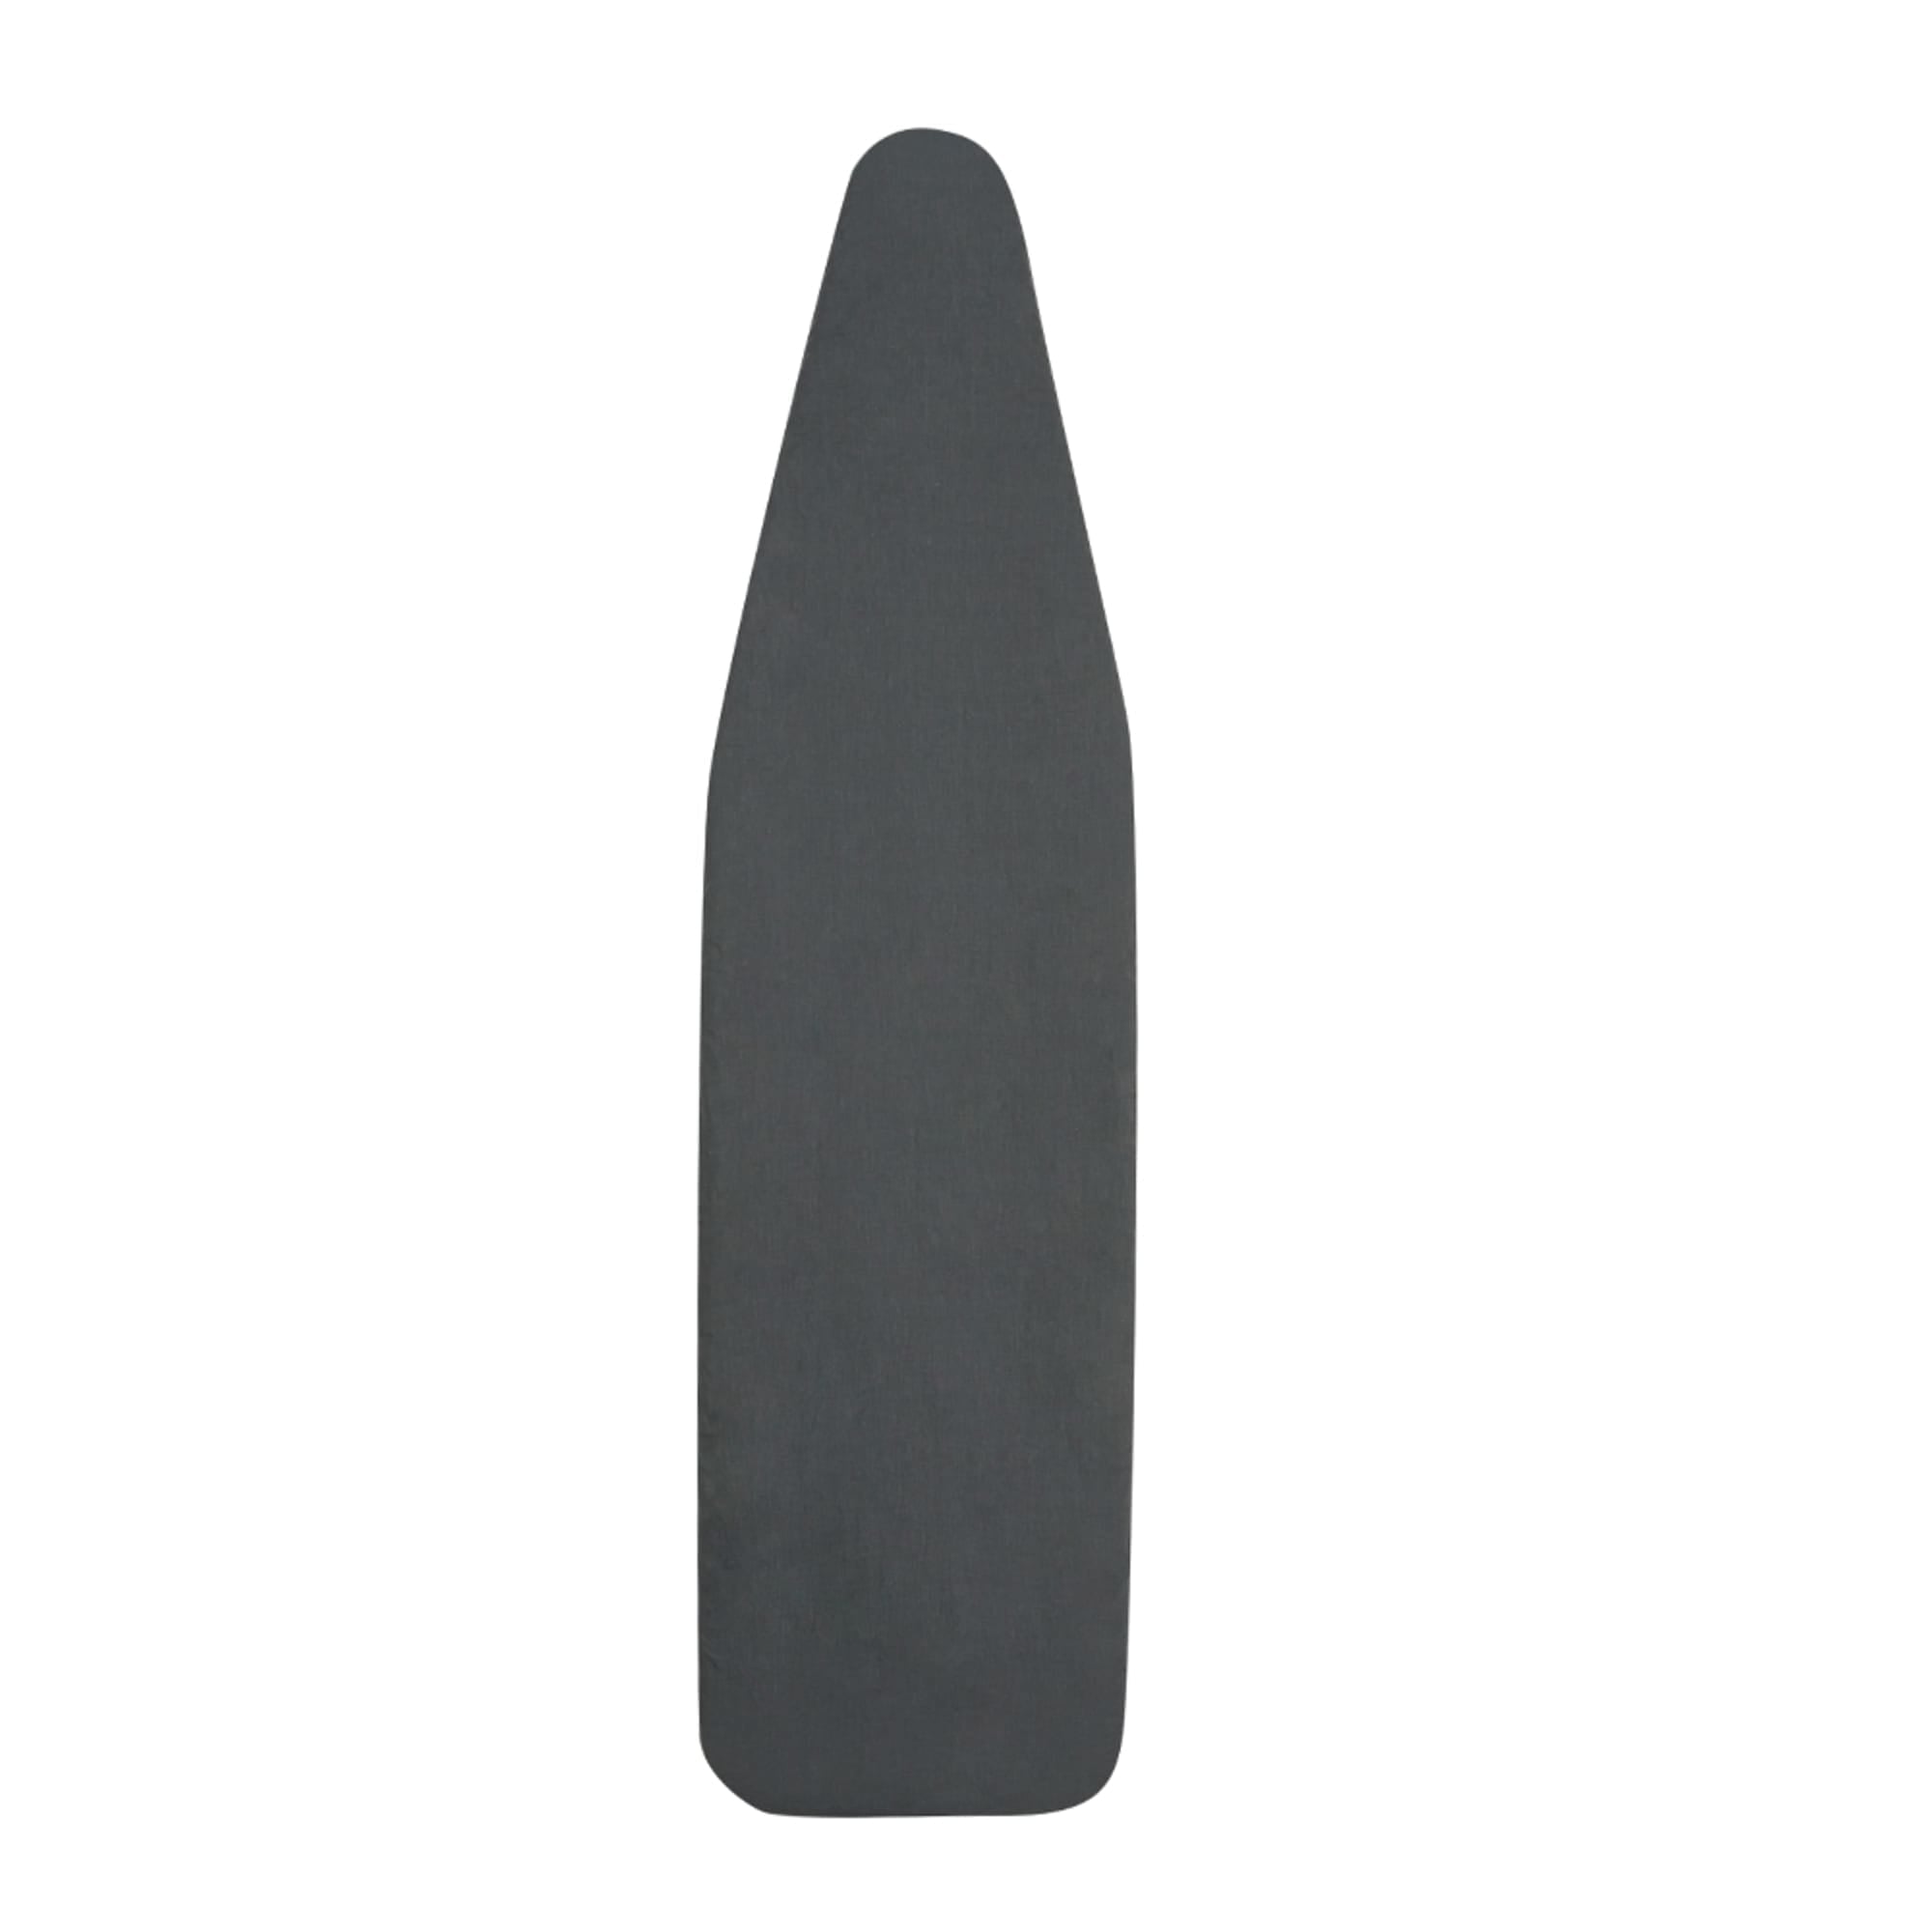 Seymour Home Products Premium Replacement Cover and Pad, Charcoal SR, Fits 53"-54" X 13"-14" $8.00 EACH, CASE PACK OF 6